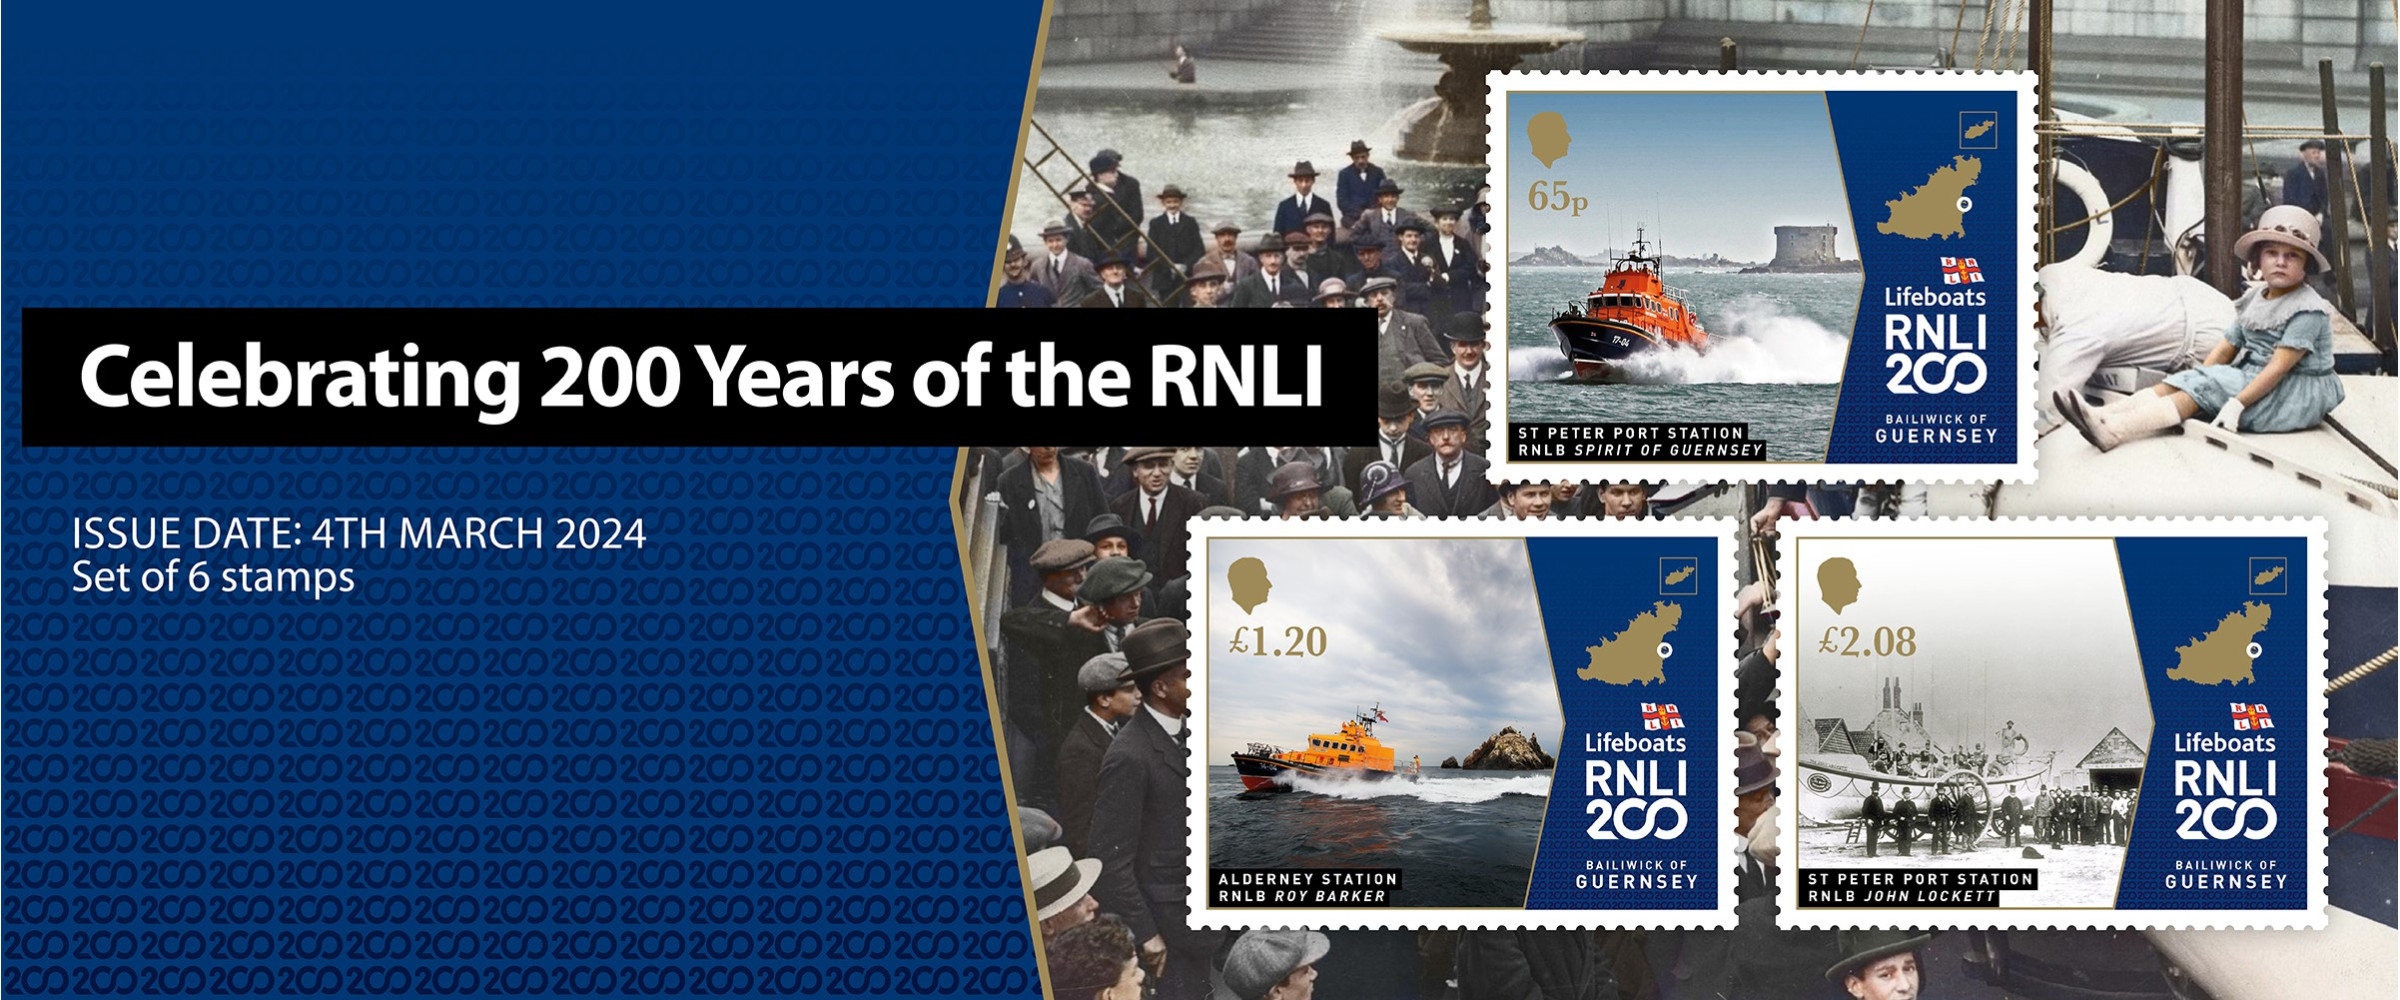 Celebrating 200 Years of the RNLI